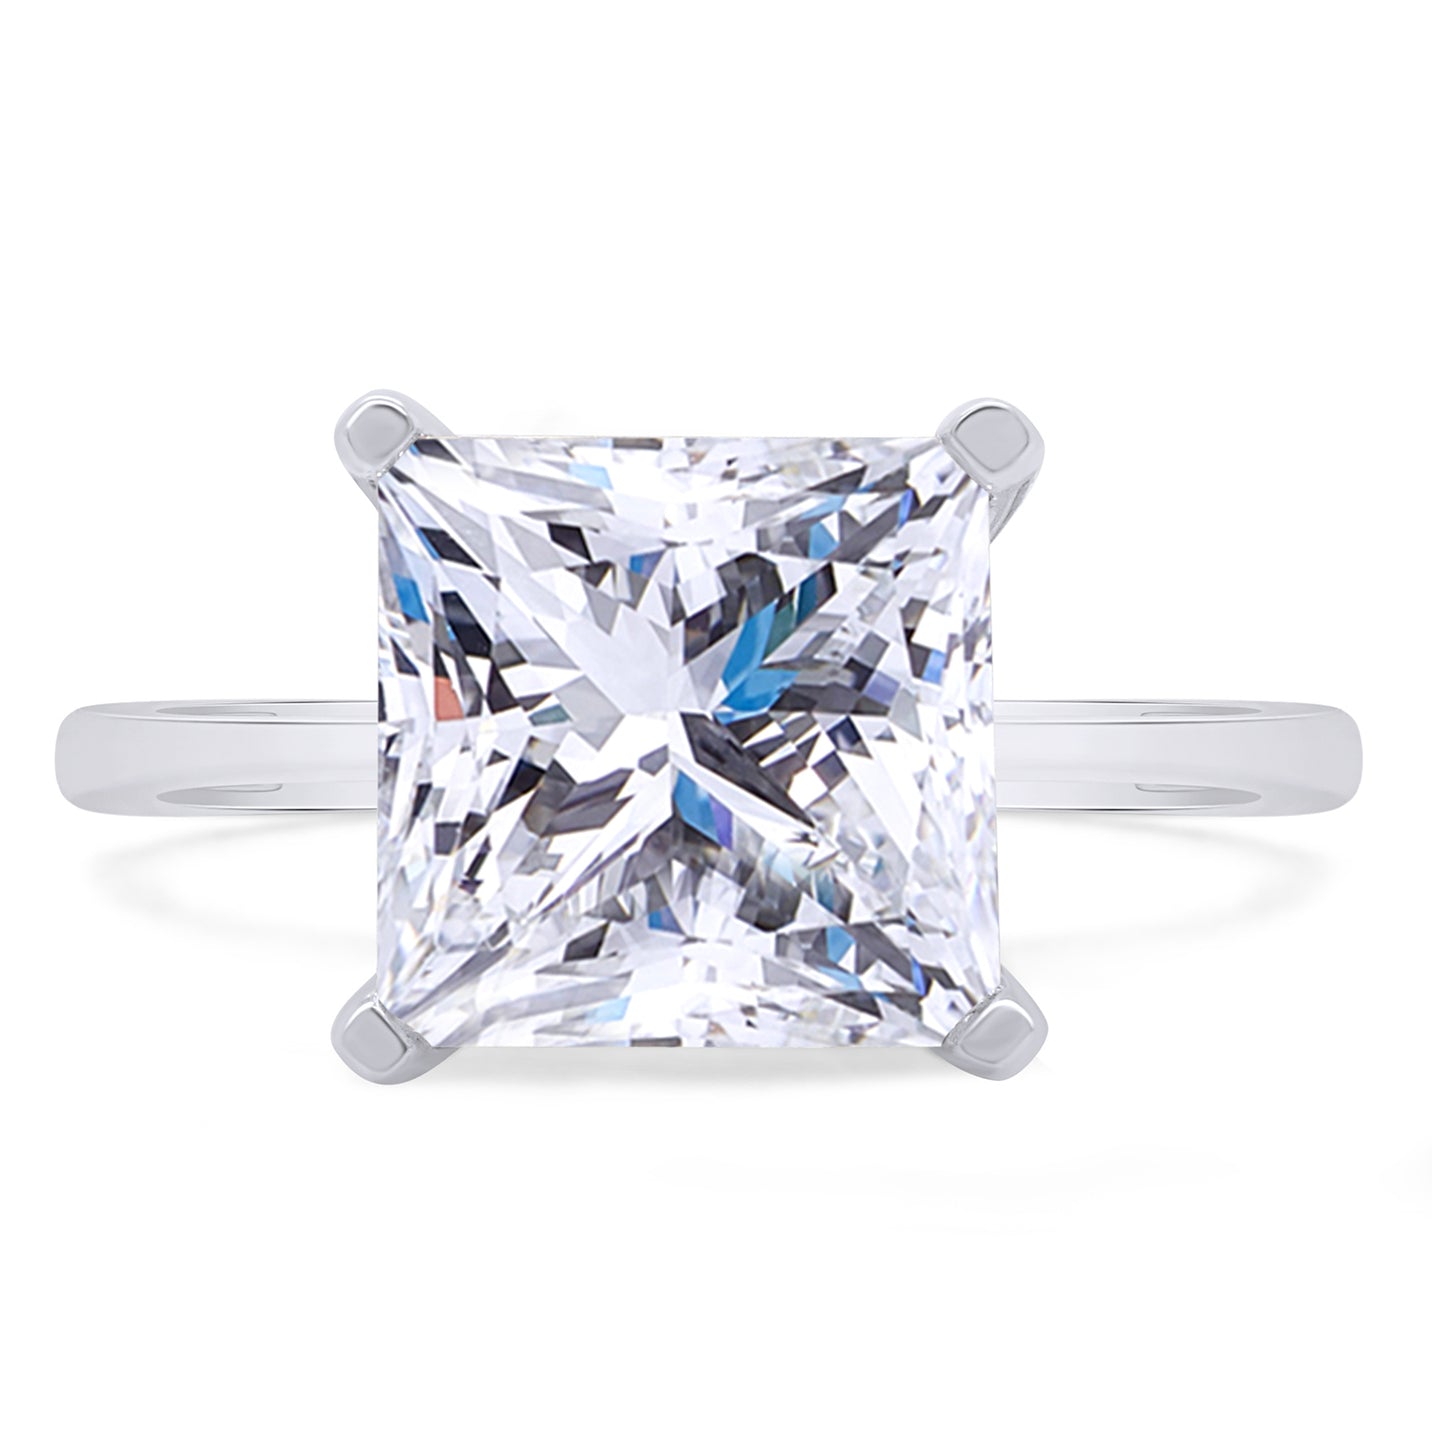 Load image into Gallery viewer, 8.5MM Princess Cut Lab Created Moissanite Diamond Solitaire Engagement Ring In 925 Sterling Silver (3.10 Cttw)
